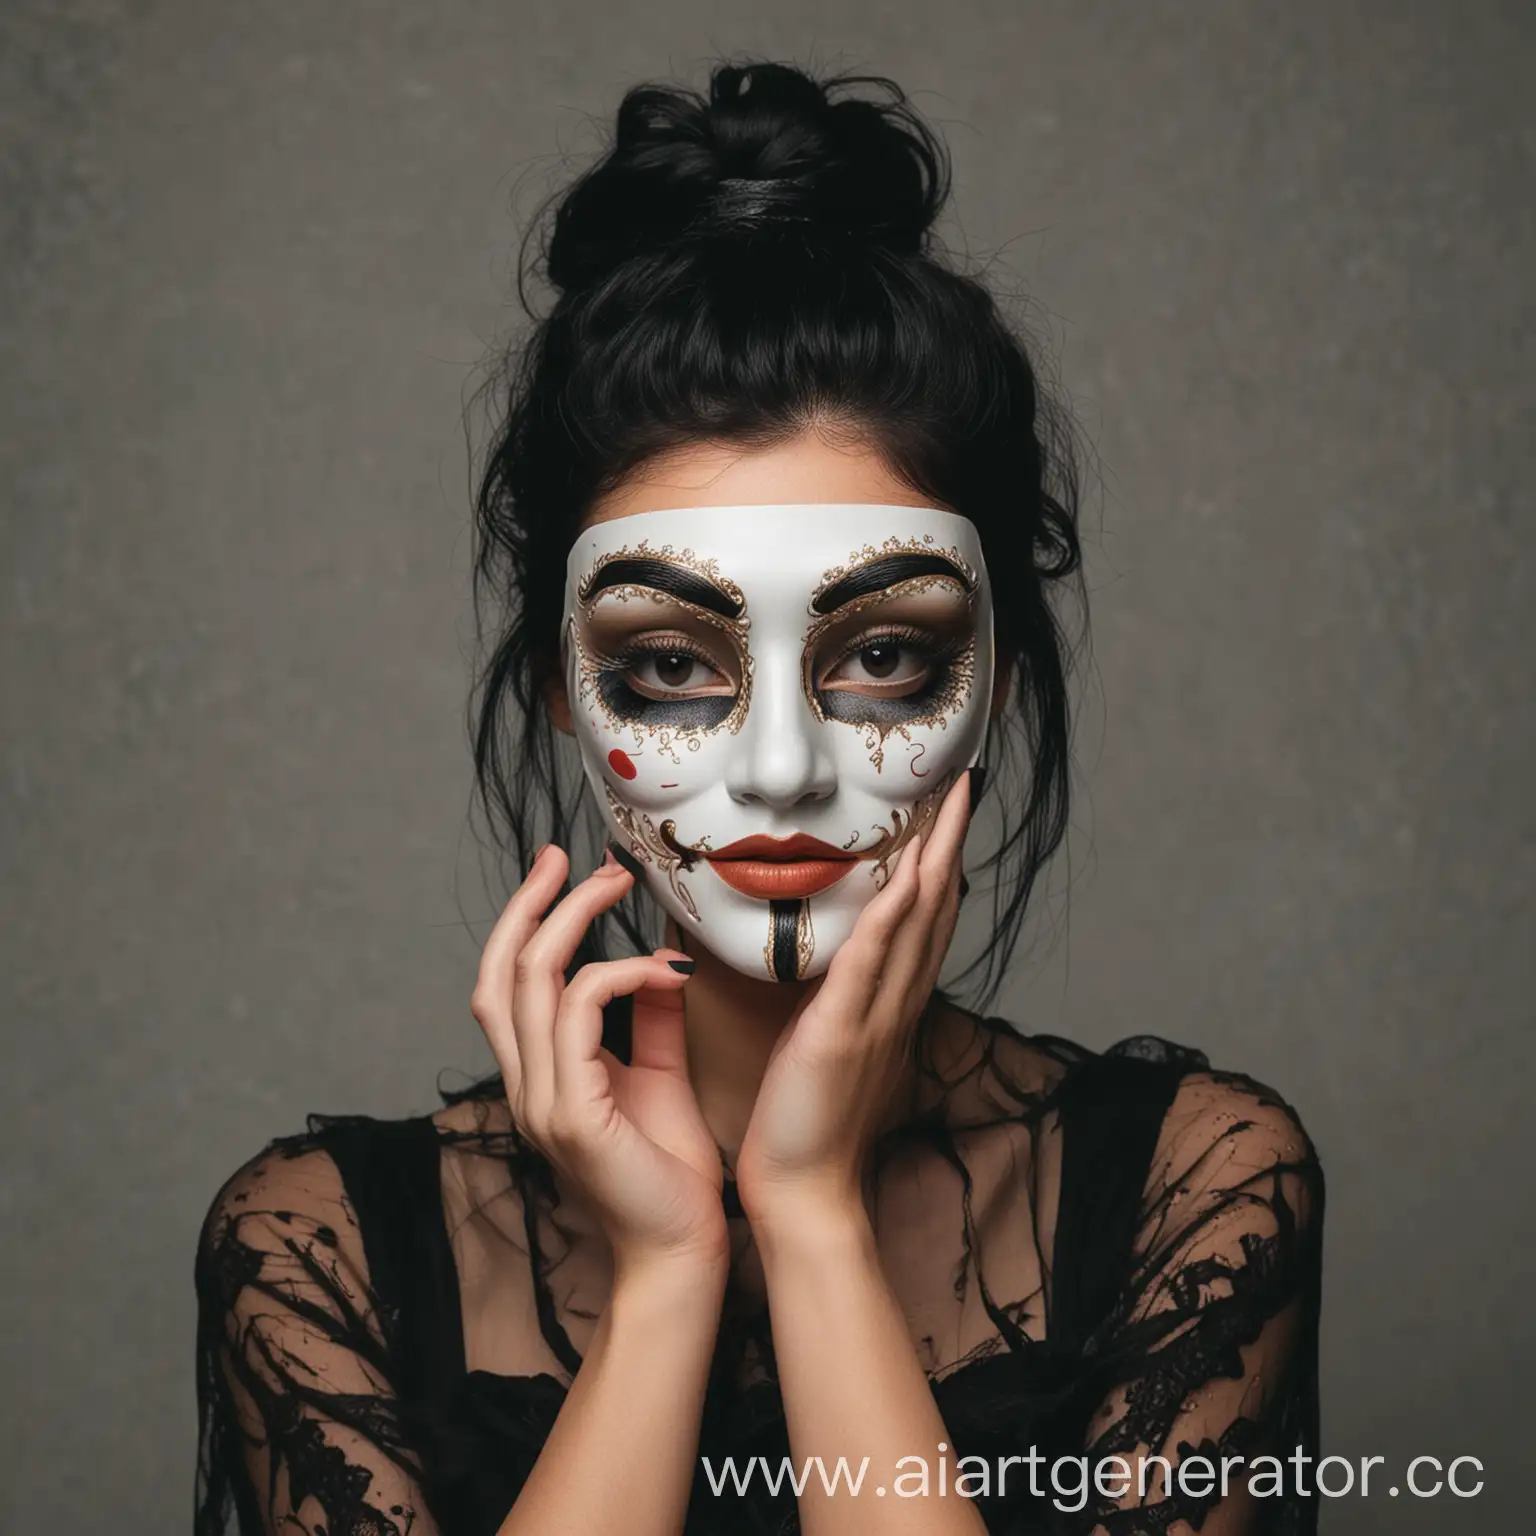 Young-Woman-with-Beautiful-Makeup-and-Black-Hair-Holding-Anonymous-Mask